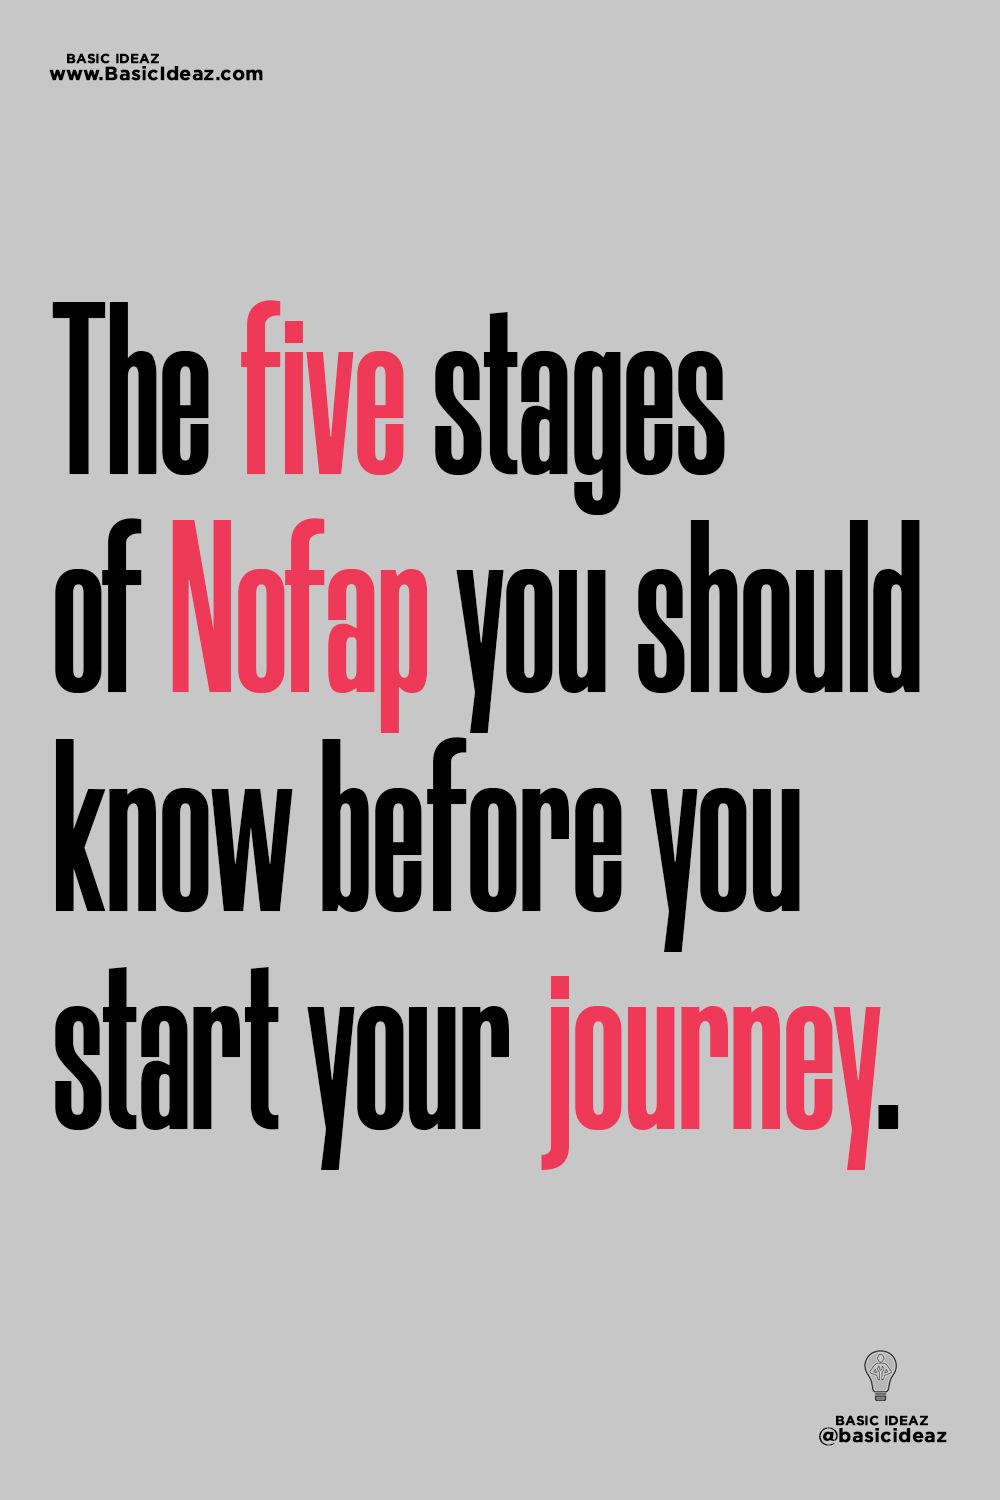 Nofap timeline-The complete nofap stages from Day 1 to Day 365